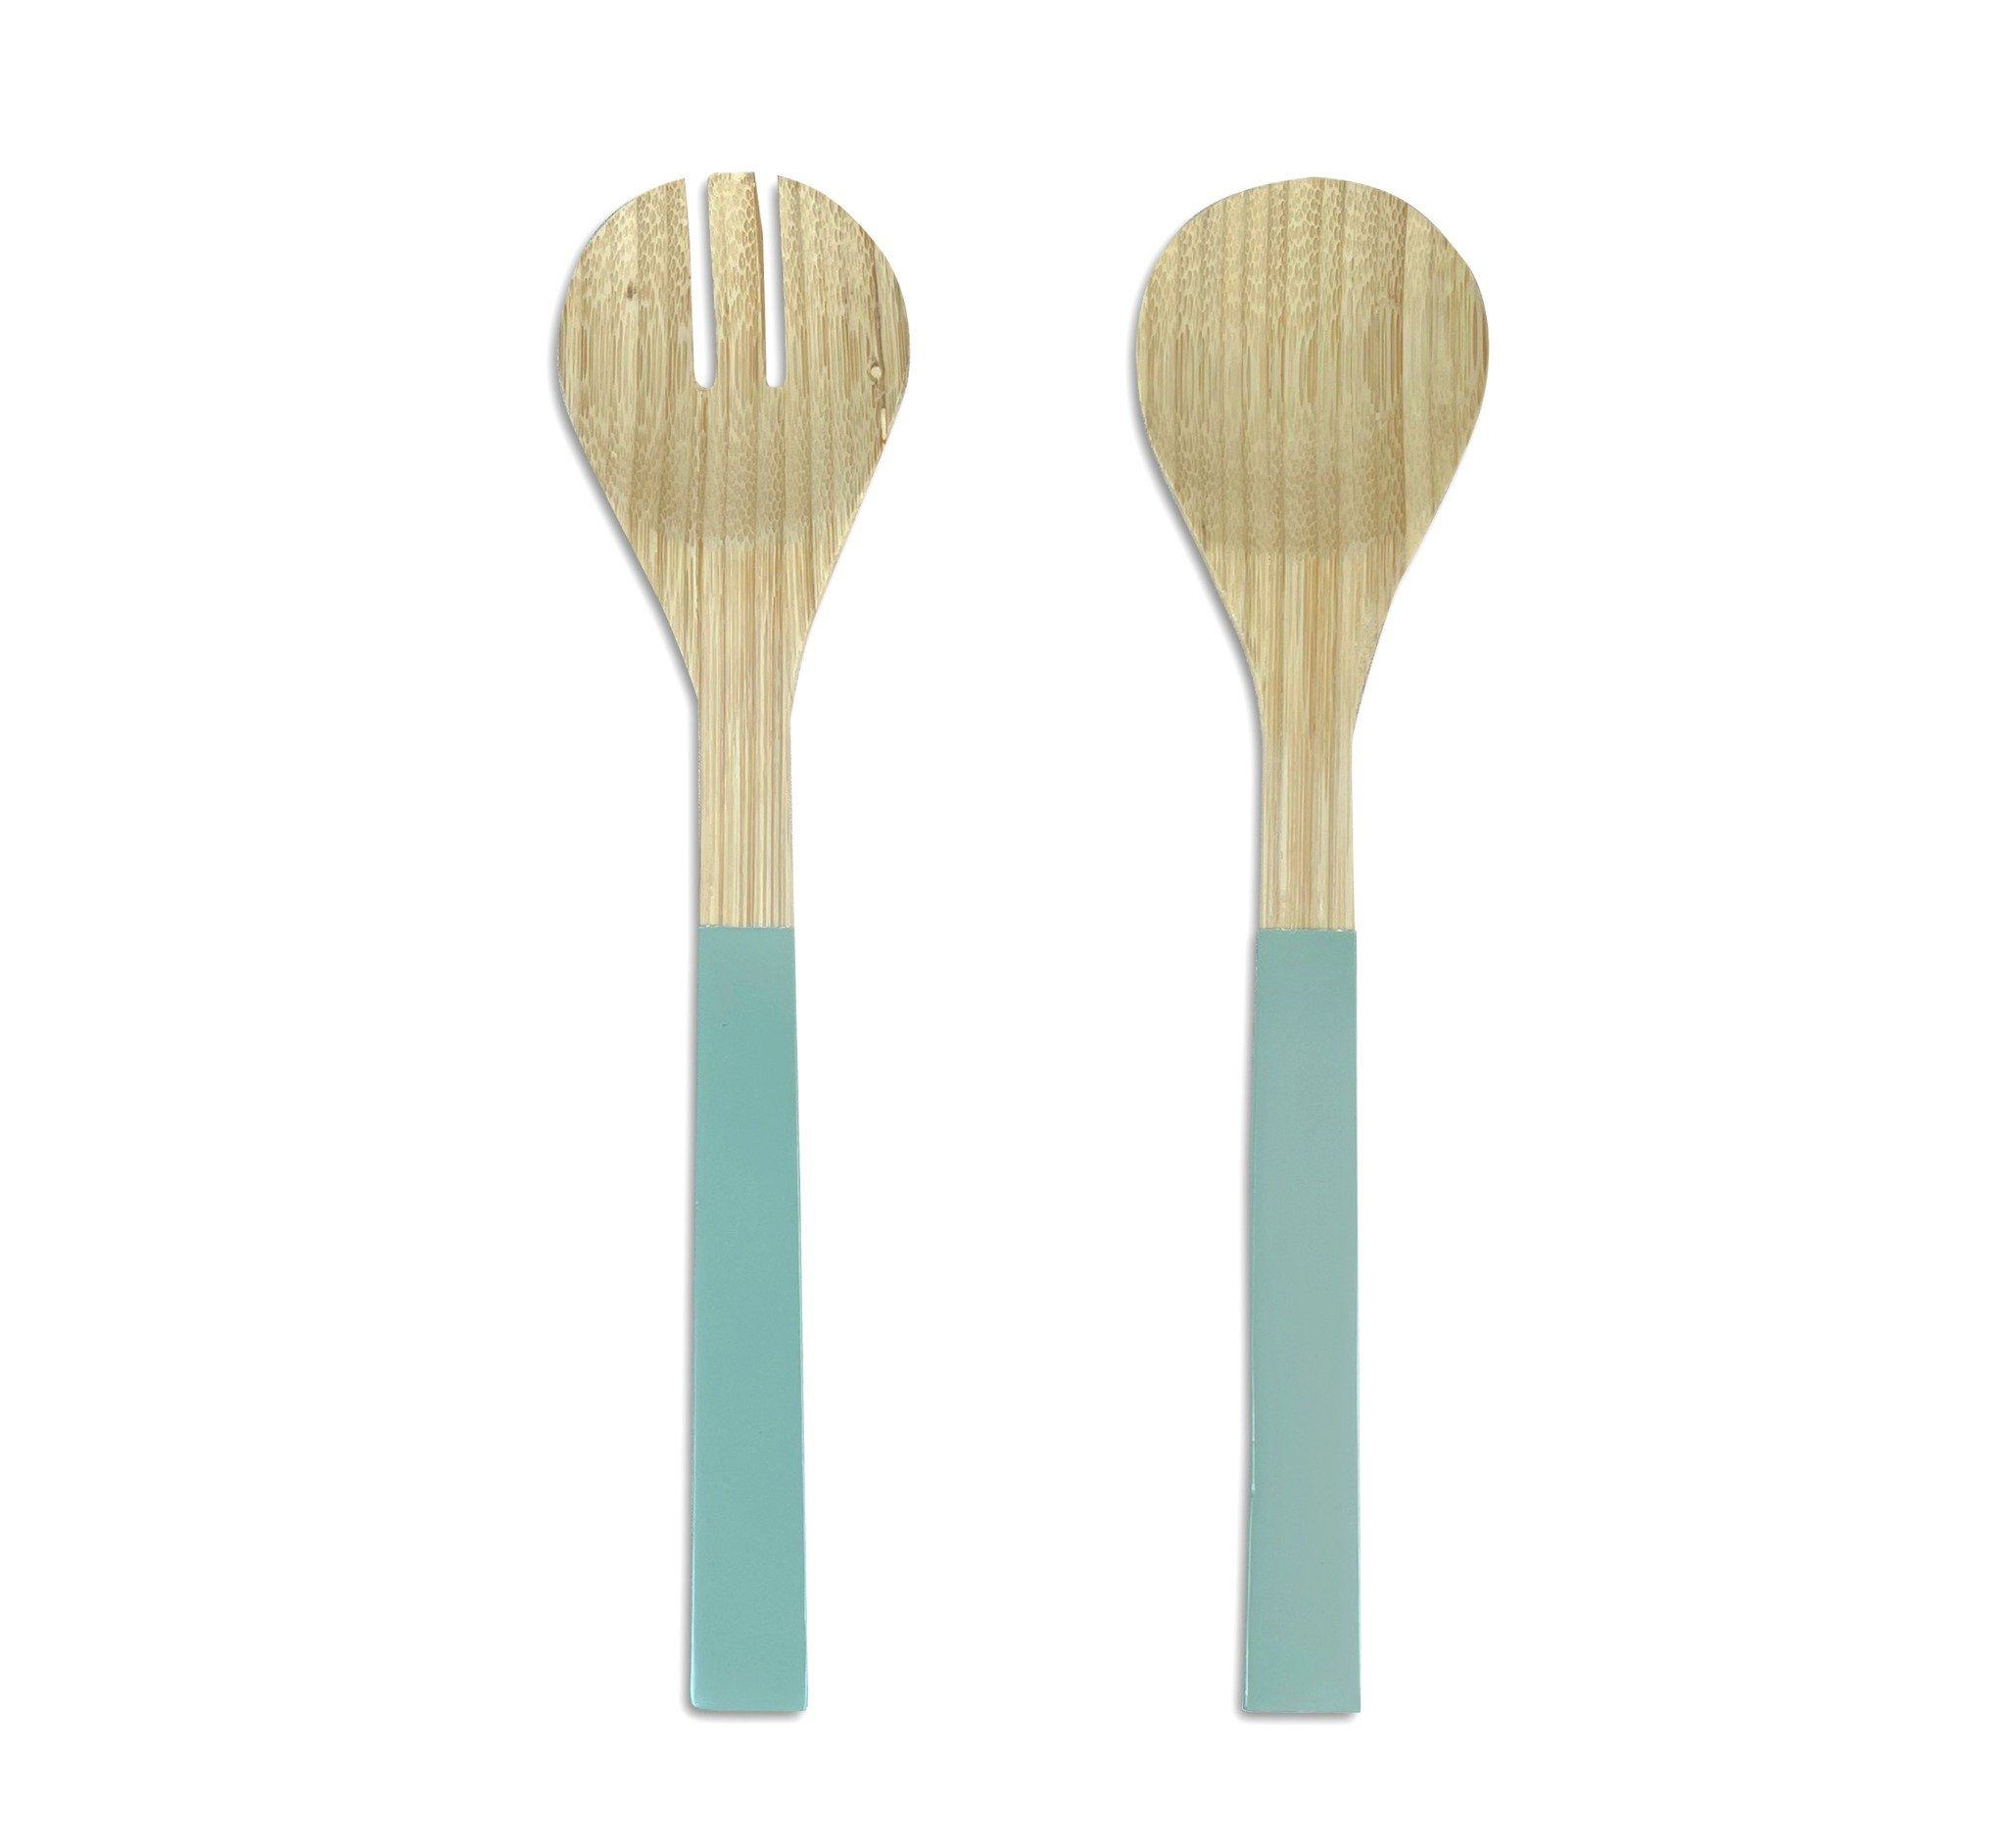  ITM - Bamboo Salad fork & spoon 